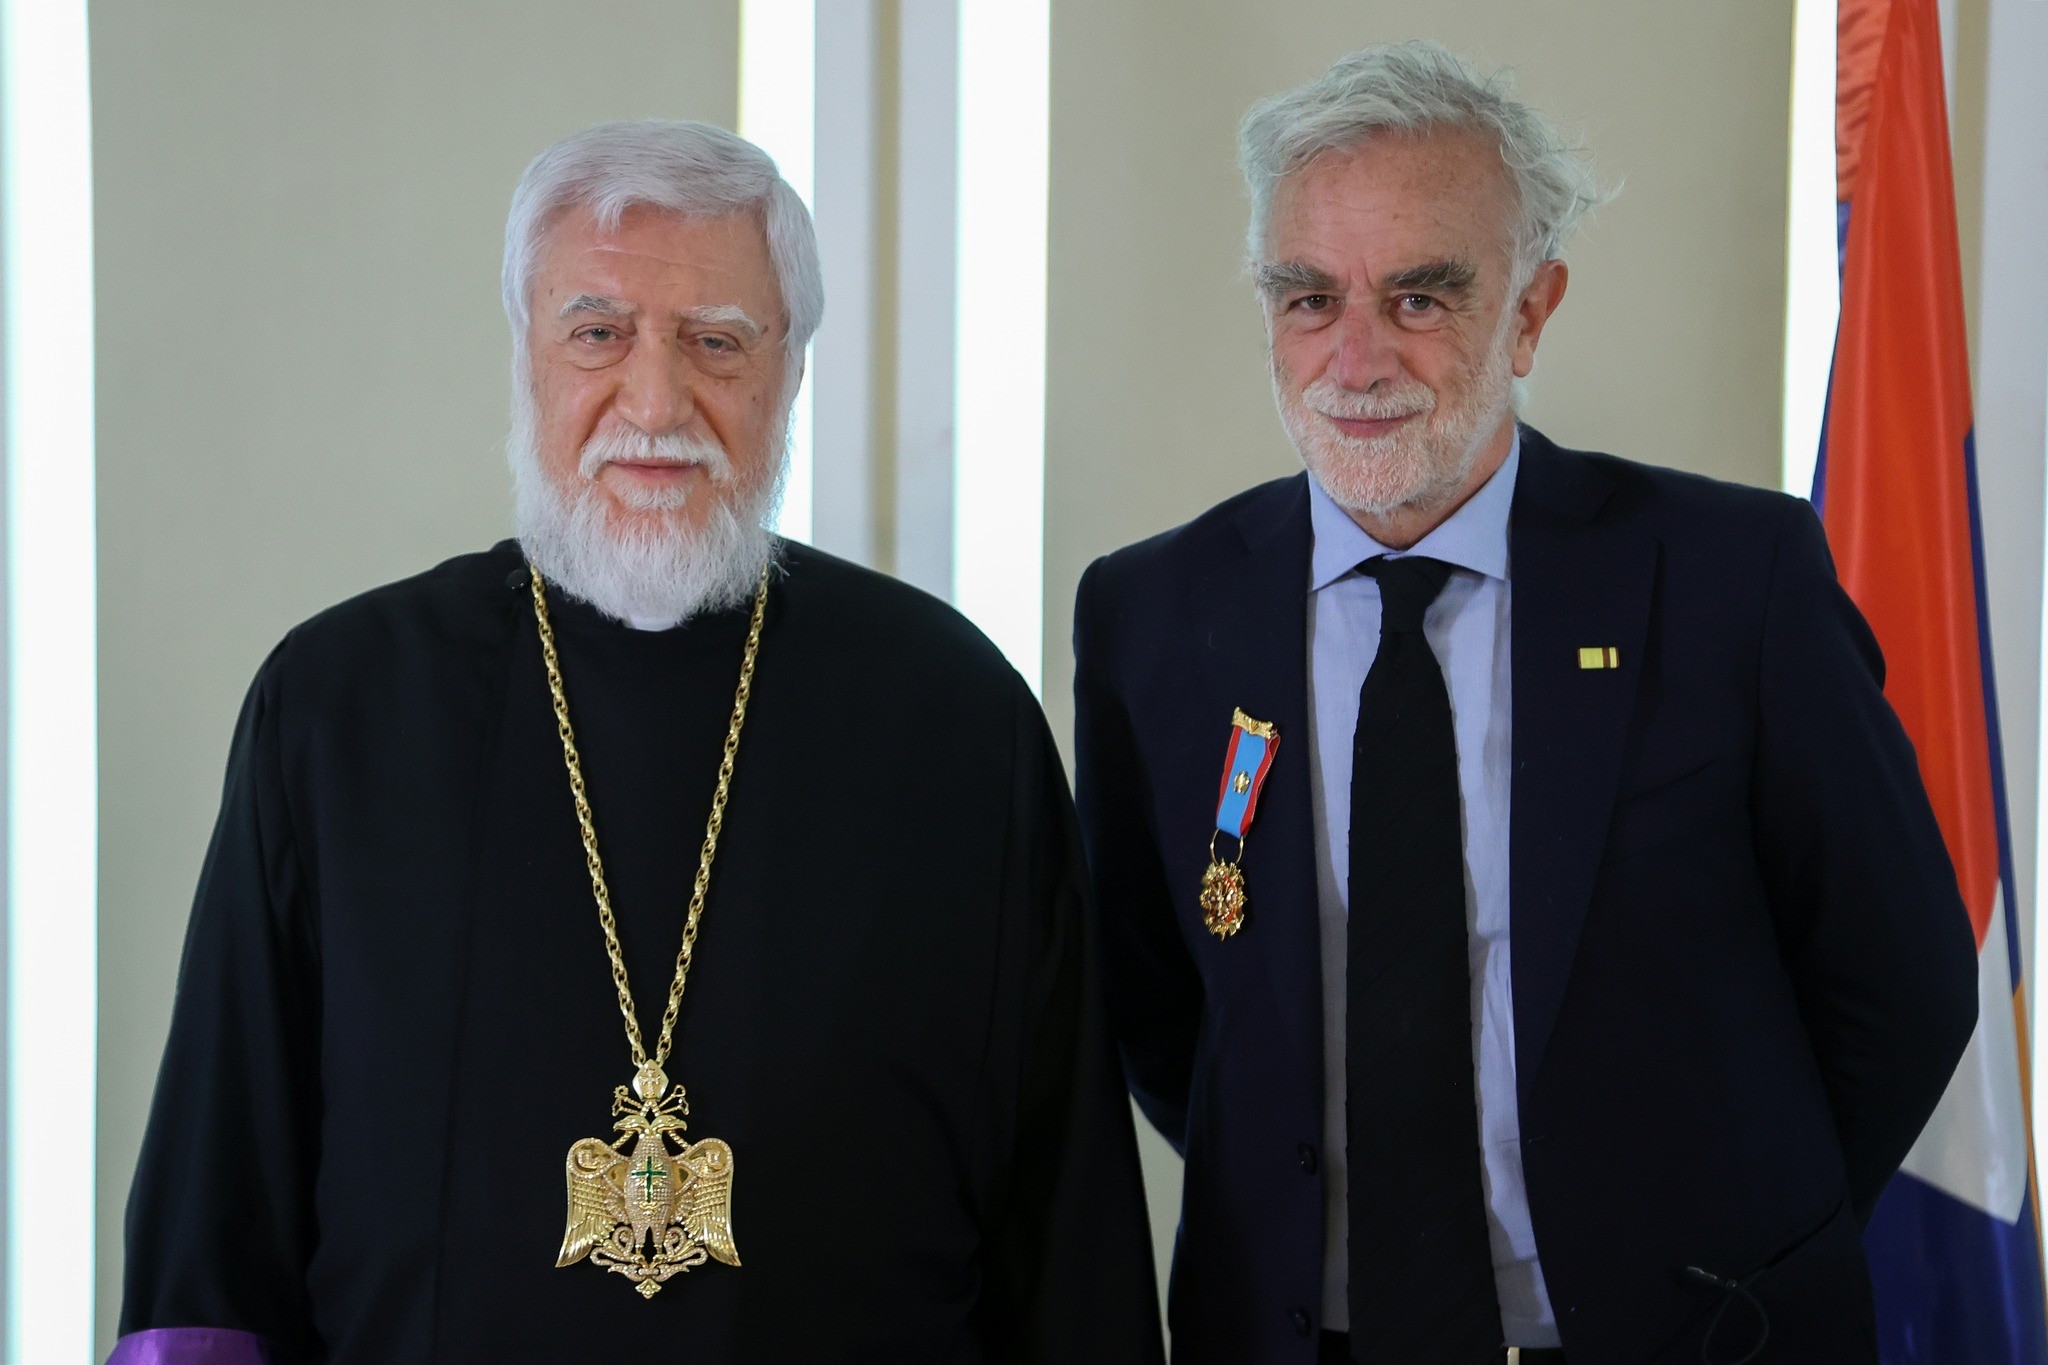 Armenian Catholicosate Hosts Former ICC Prosecutor to Discuss Genocides and Justice